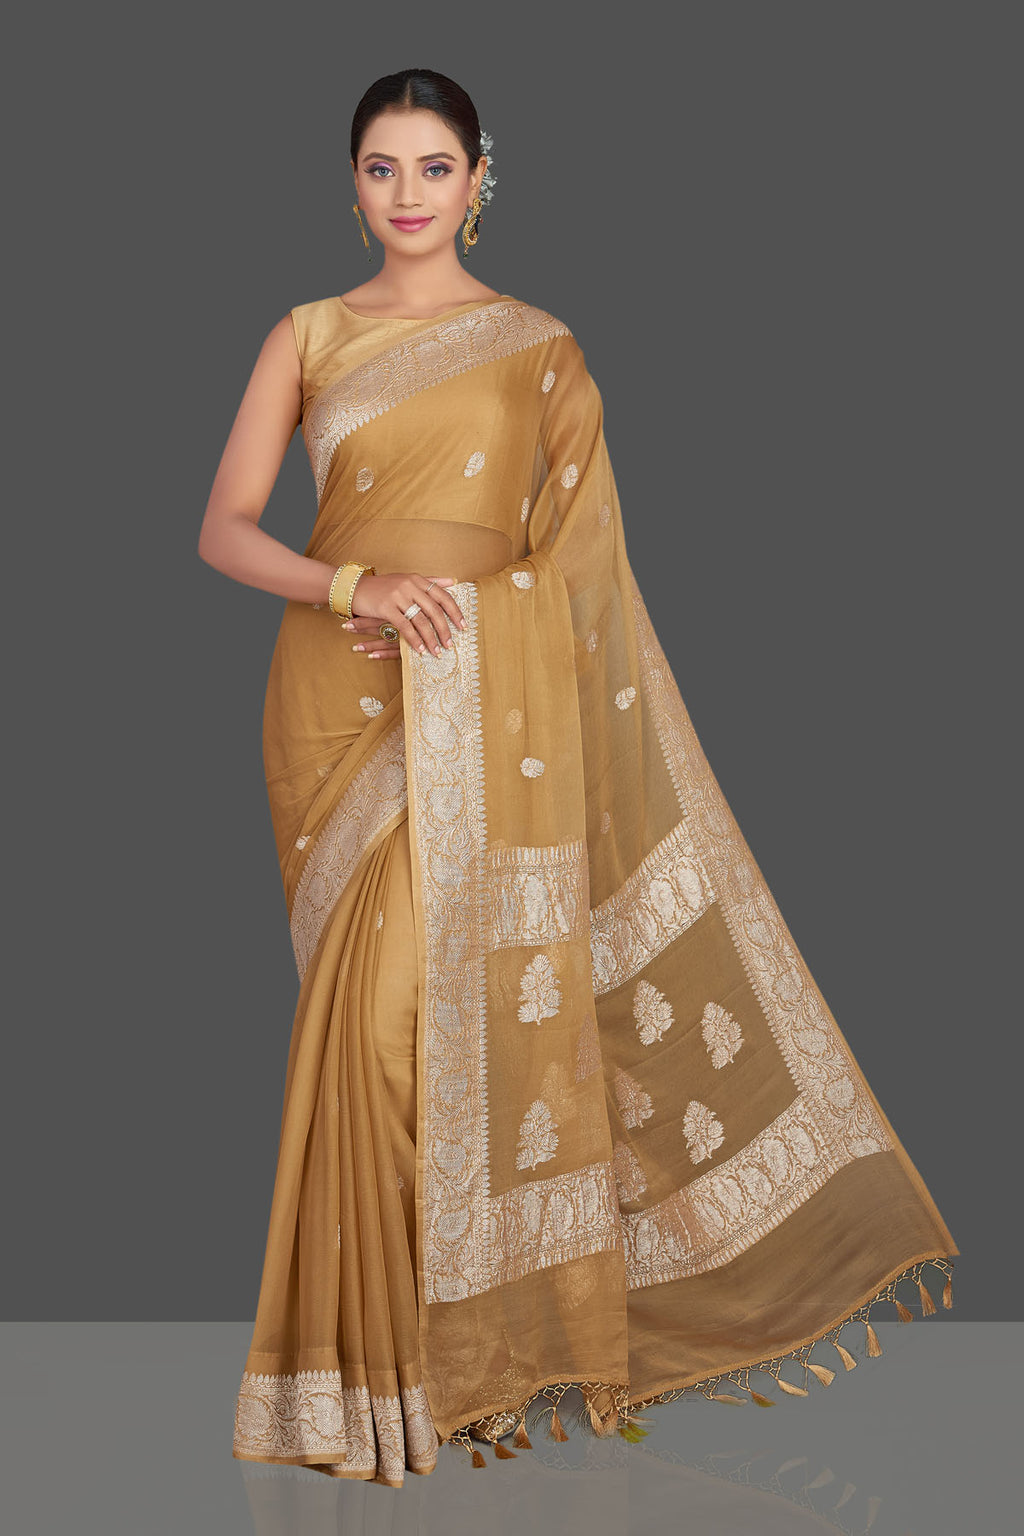 Buy beautiful beige chiffon georgette Banarasi saree online in USA with silver zari border. Look your best on special occasions with stunning Banarasi sarees, pure silk saris, tussar saris, handwoven sarees from Pure Elegance Indian saree store in USA.-full view